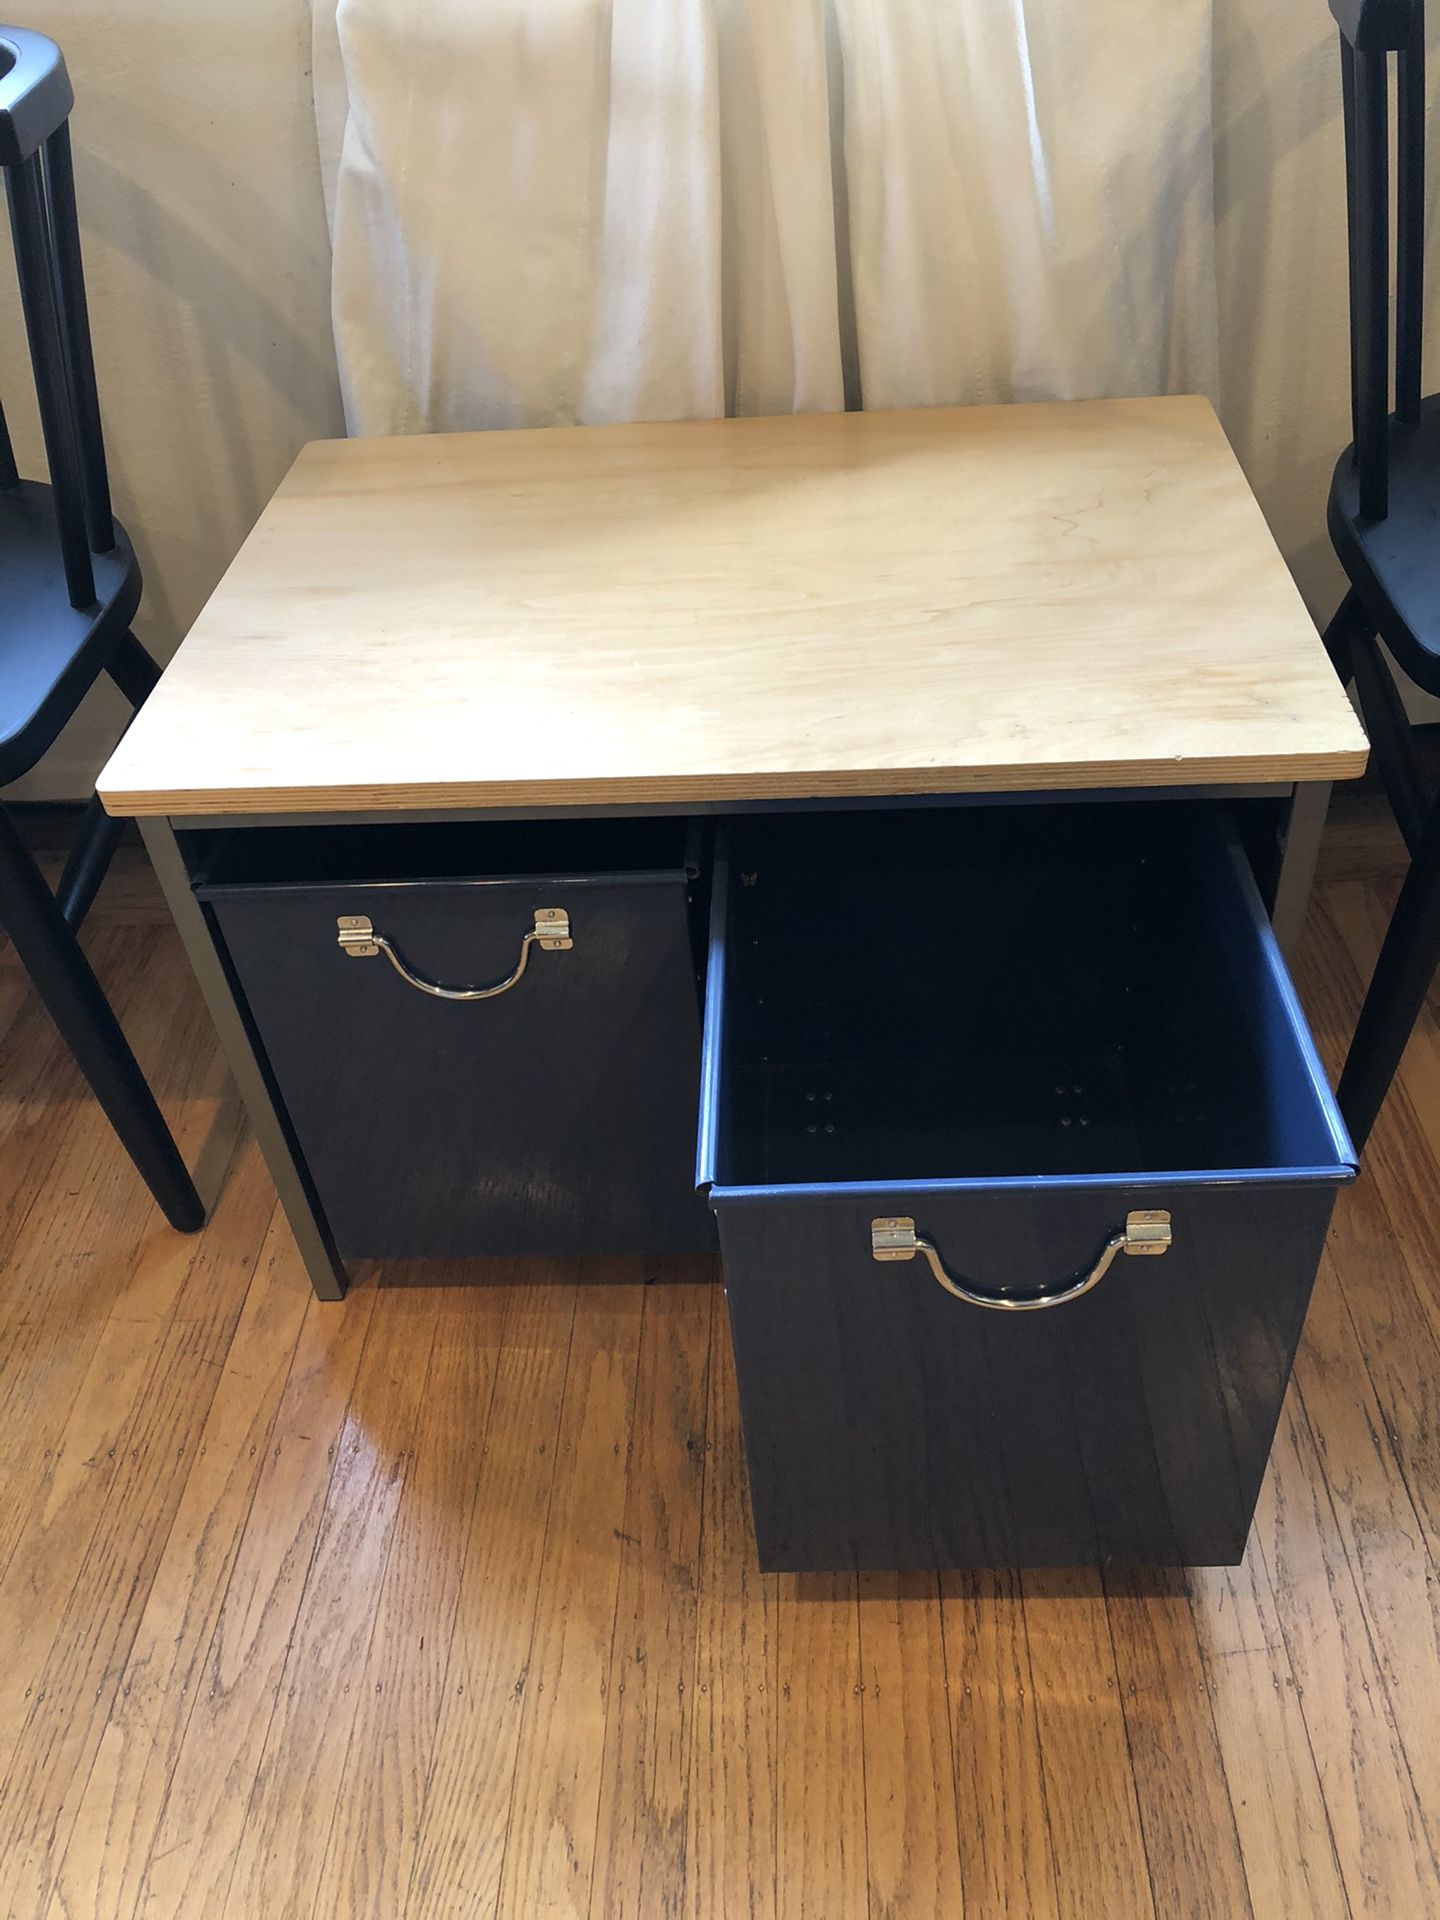 PBTeen inspired small table with 2 rolling storage bins